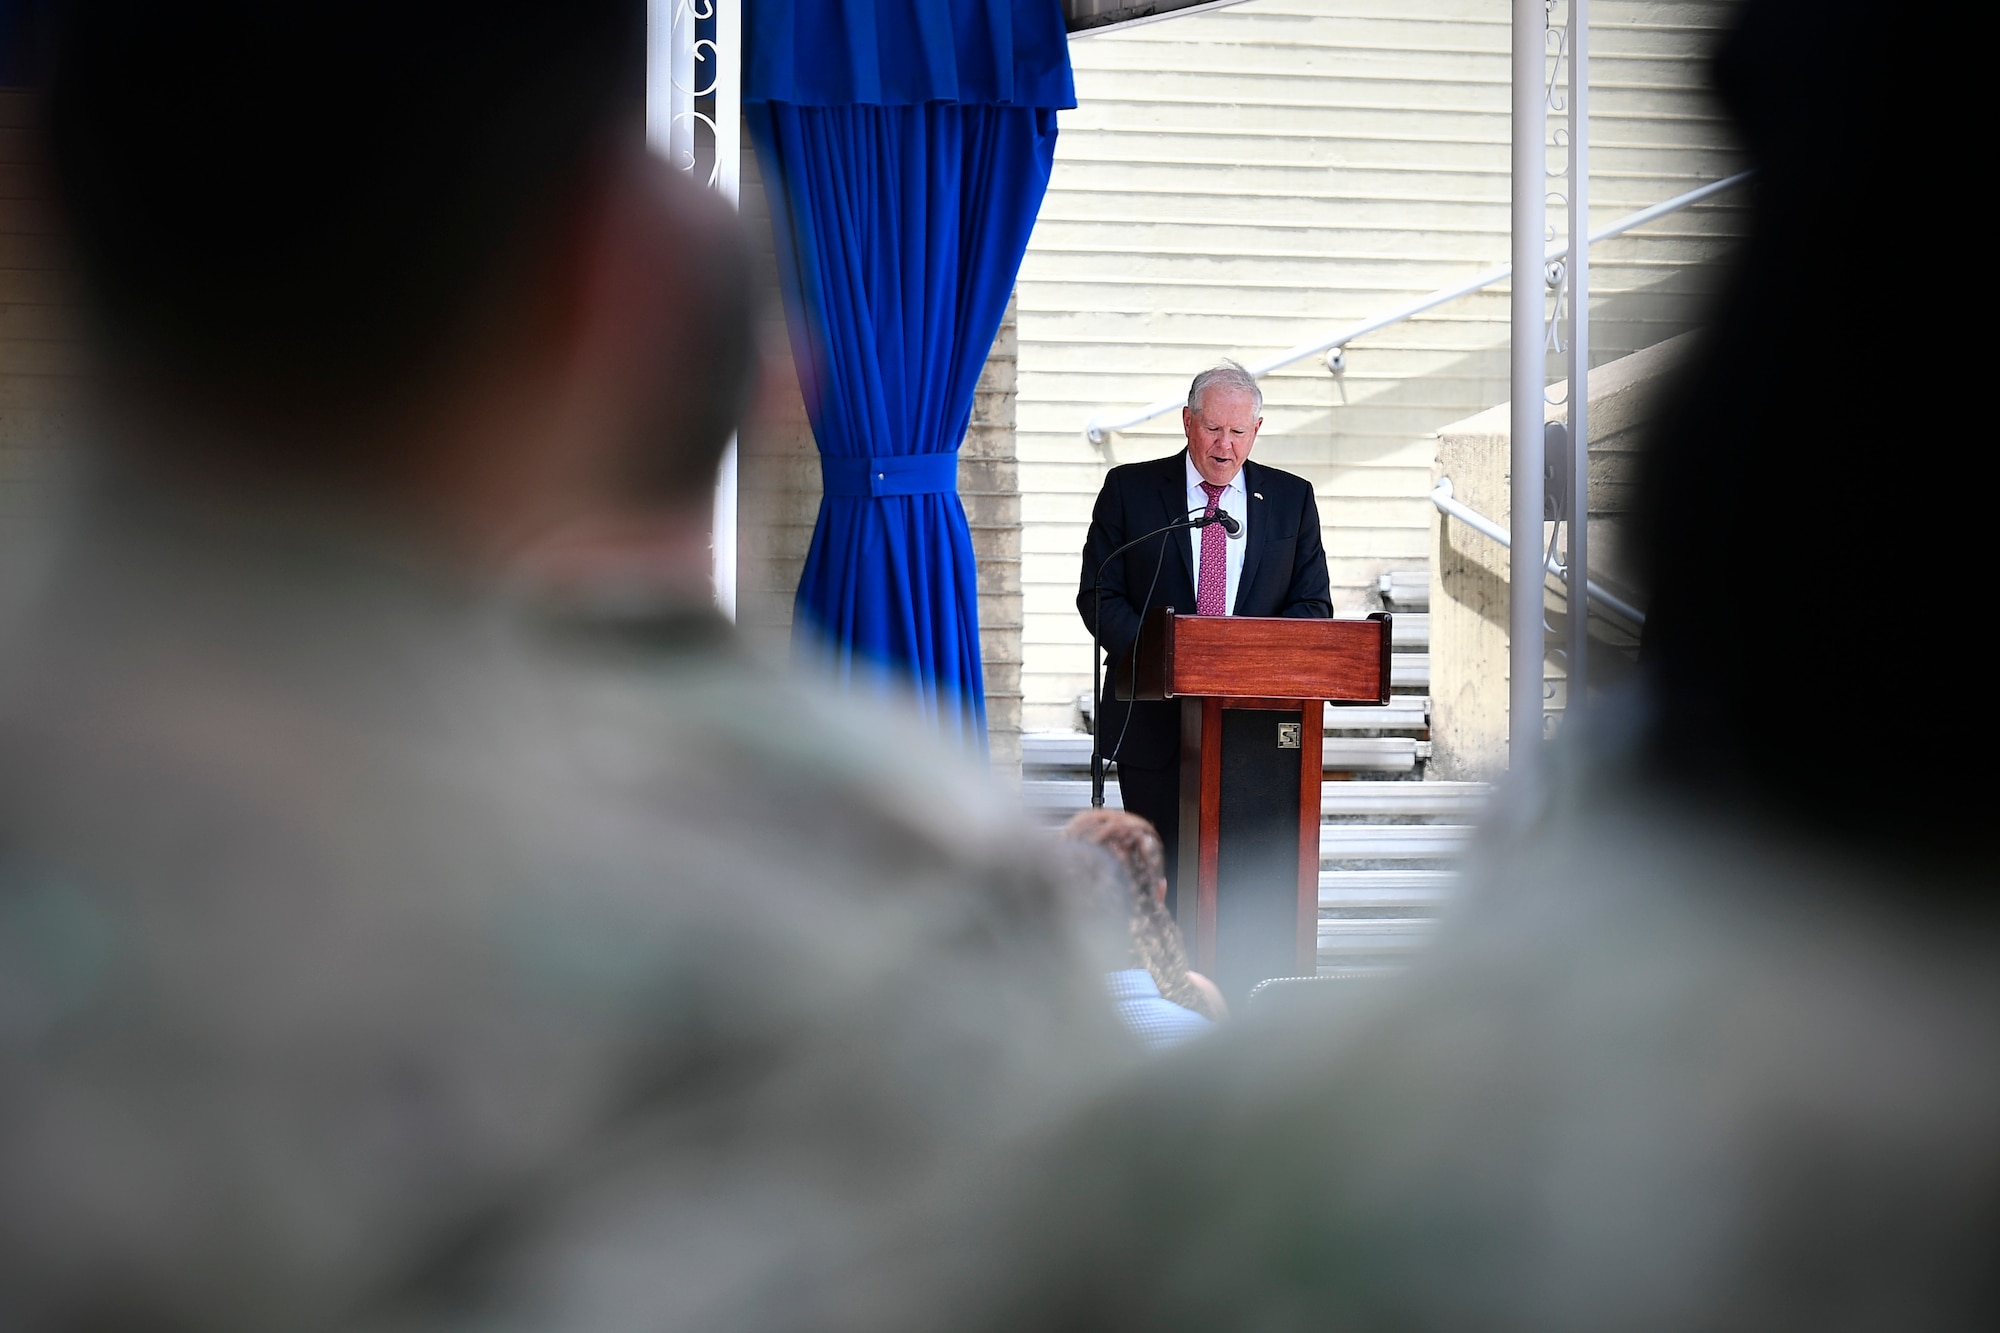 Secretary of the Air Force Frank Kendall offers opening remarks during a Juneteenth Celebration at the Pentagon in Arlington, Va., June 21, 2022. Hundreds of Department of Defense personnel and service members attended the ceremony, which was the first official Juneteenth event held in the Pentagon since the holiday became federally recognized in 2021. (U.S. Air Force photo by Staff Sgt. Elora J. McCutcheon)